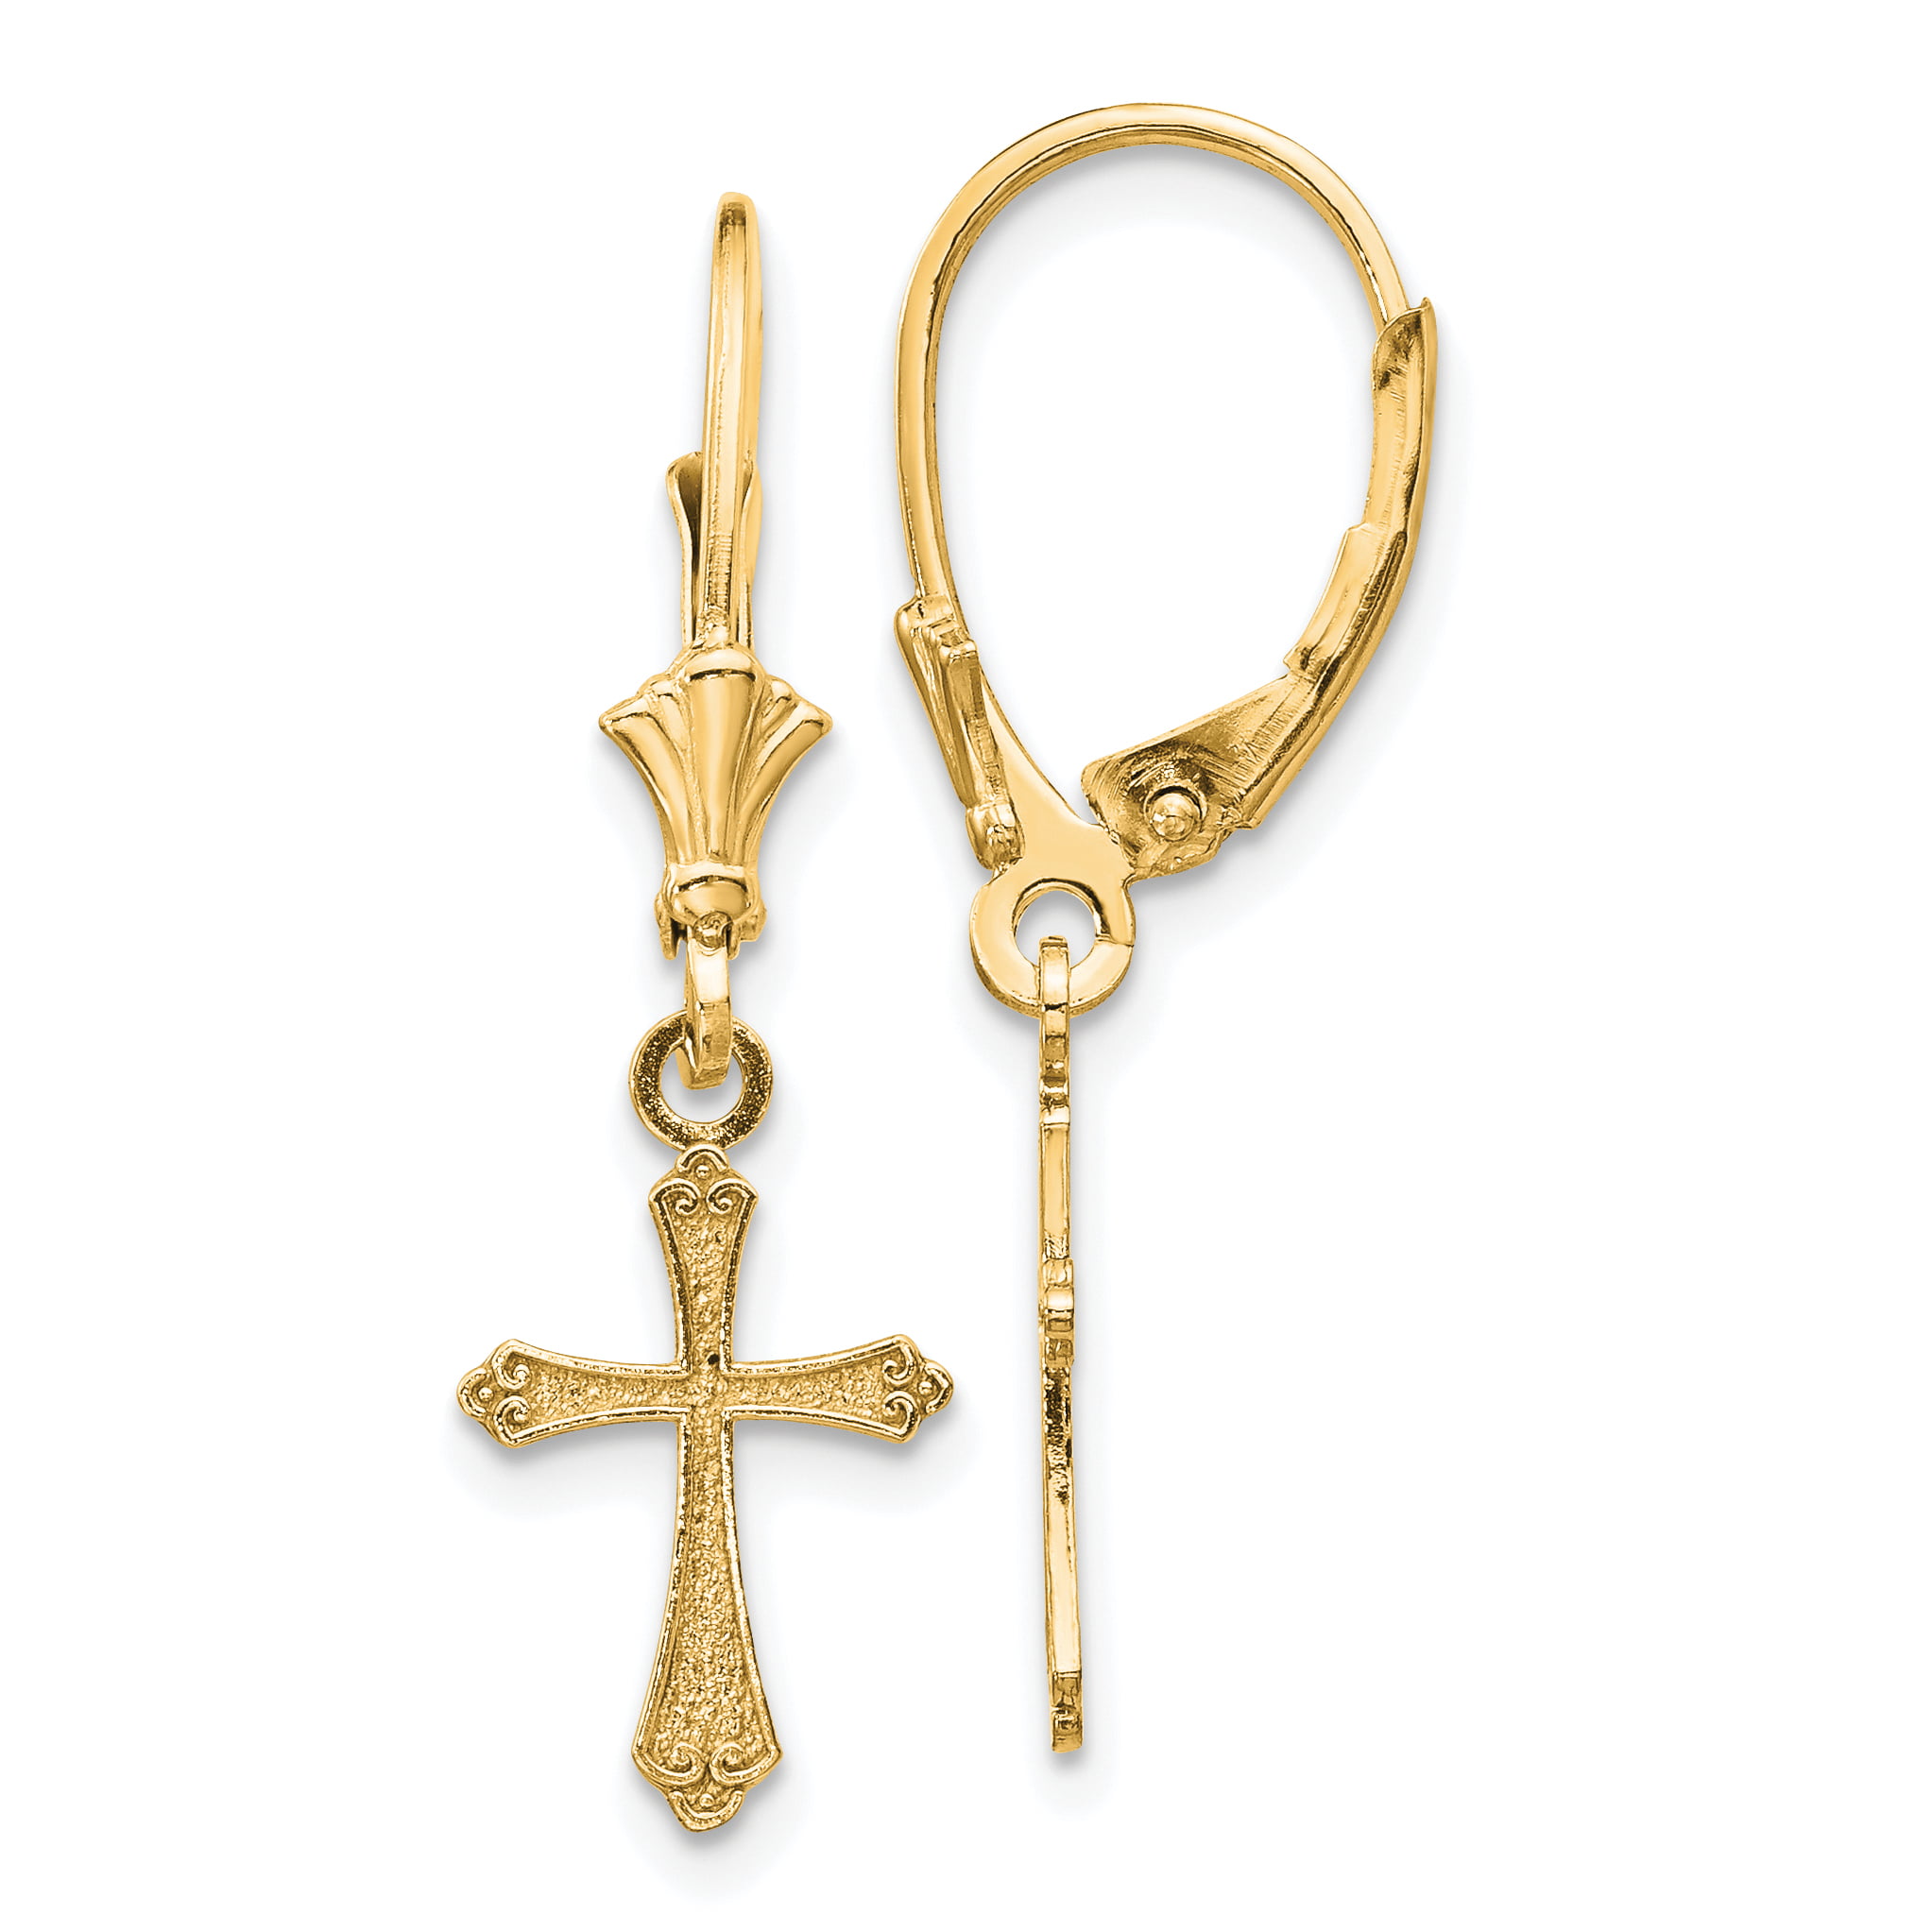 14K Yellow Gold Mini Cross with Scroll Tips Dangle Lever back Earrings MSRP $202